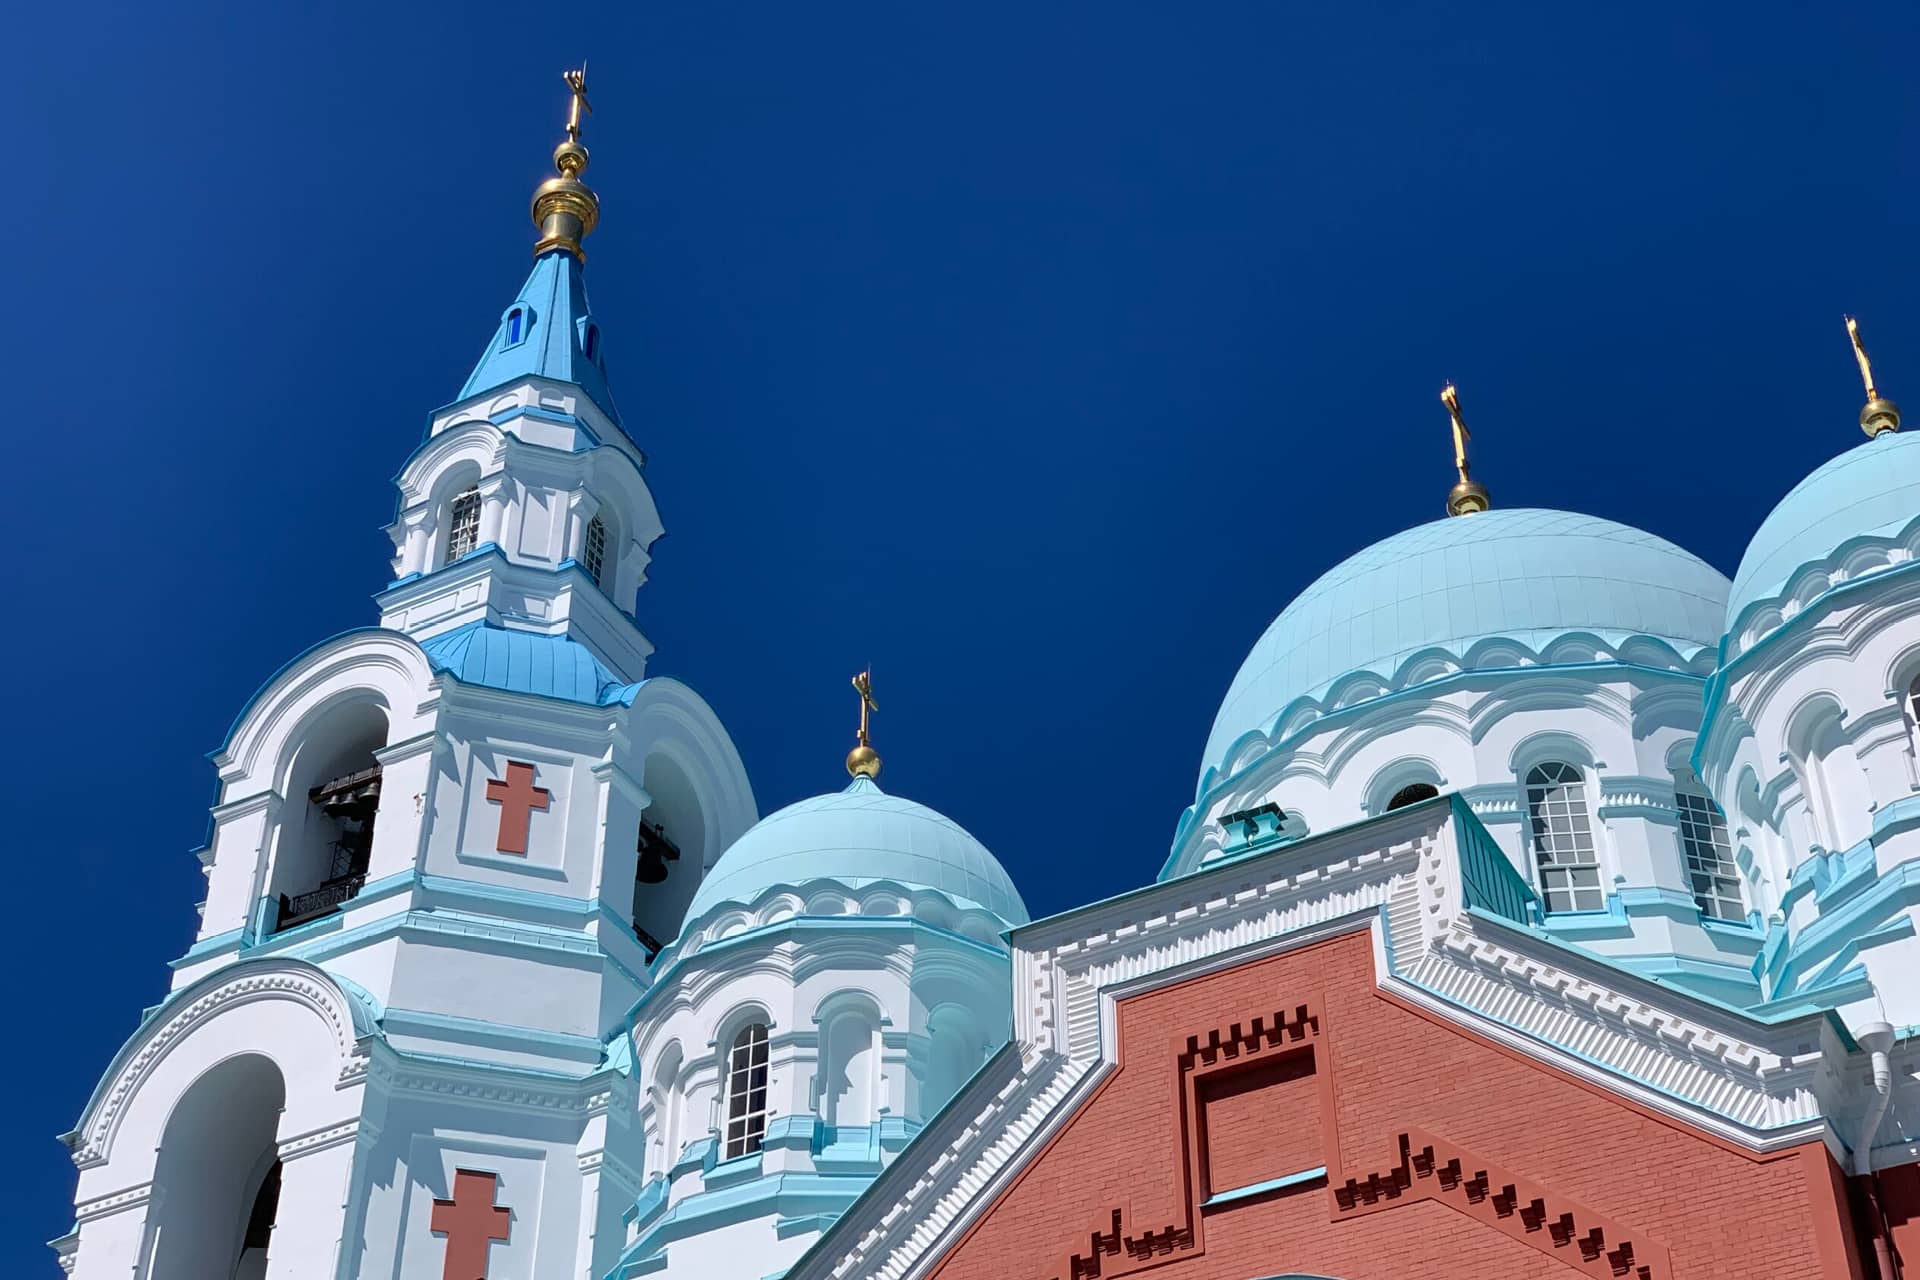 View of the top of Orthodox cathedral from the ground. Orthodox cathedral with the red base, white towers and blue domes topped with gilded crosses, bell tower decorated with red orthodox crossed